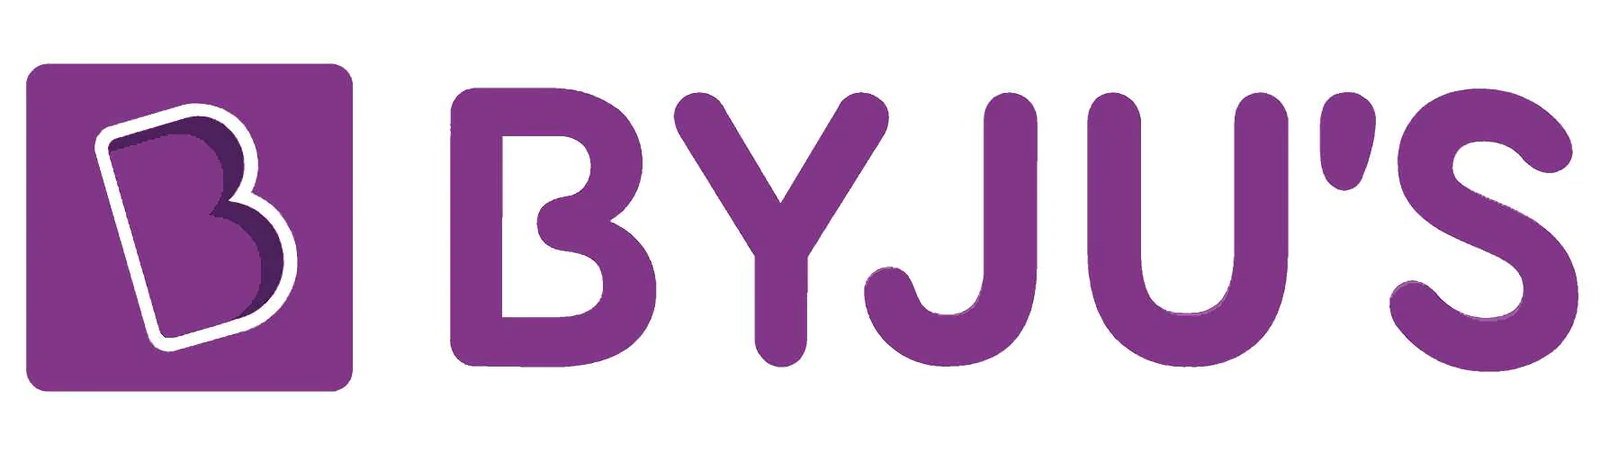 Byjus logo vector 1617617962495 1617617998486